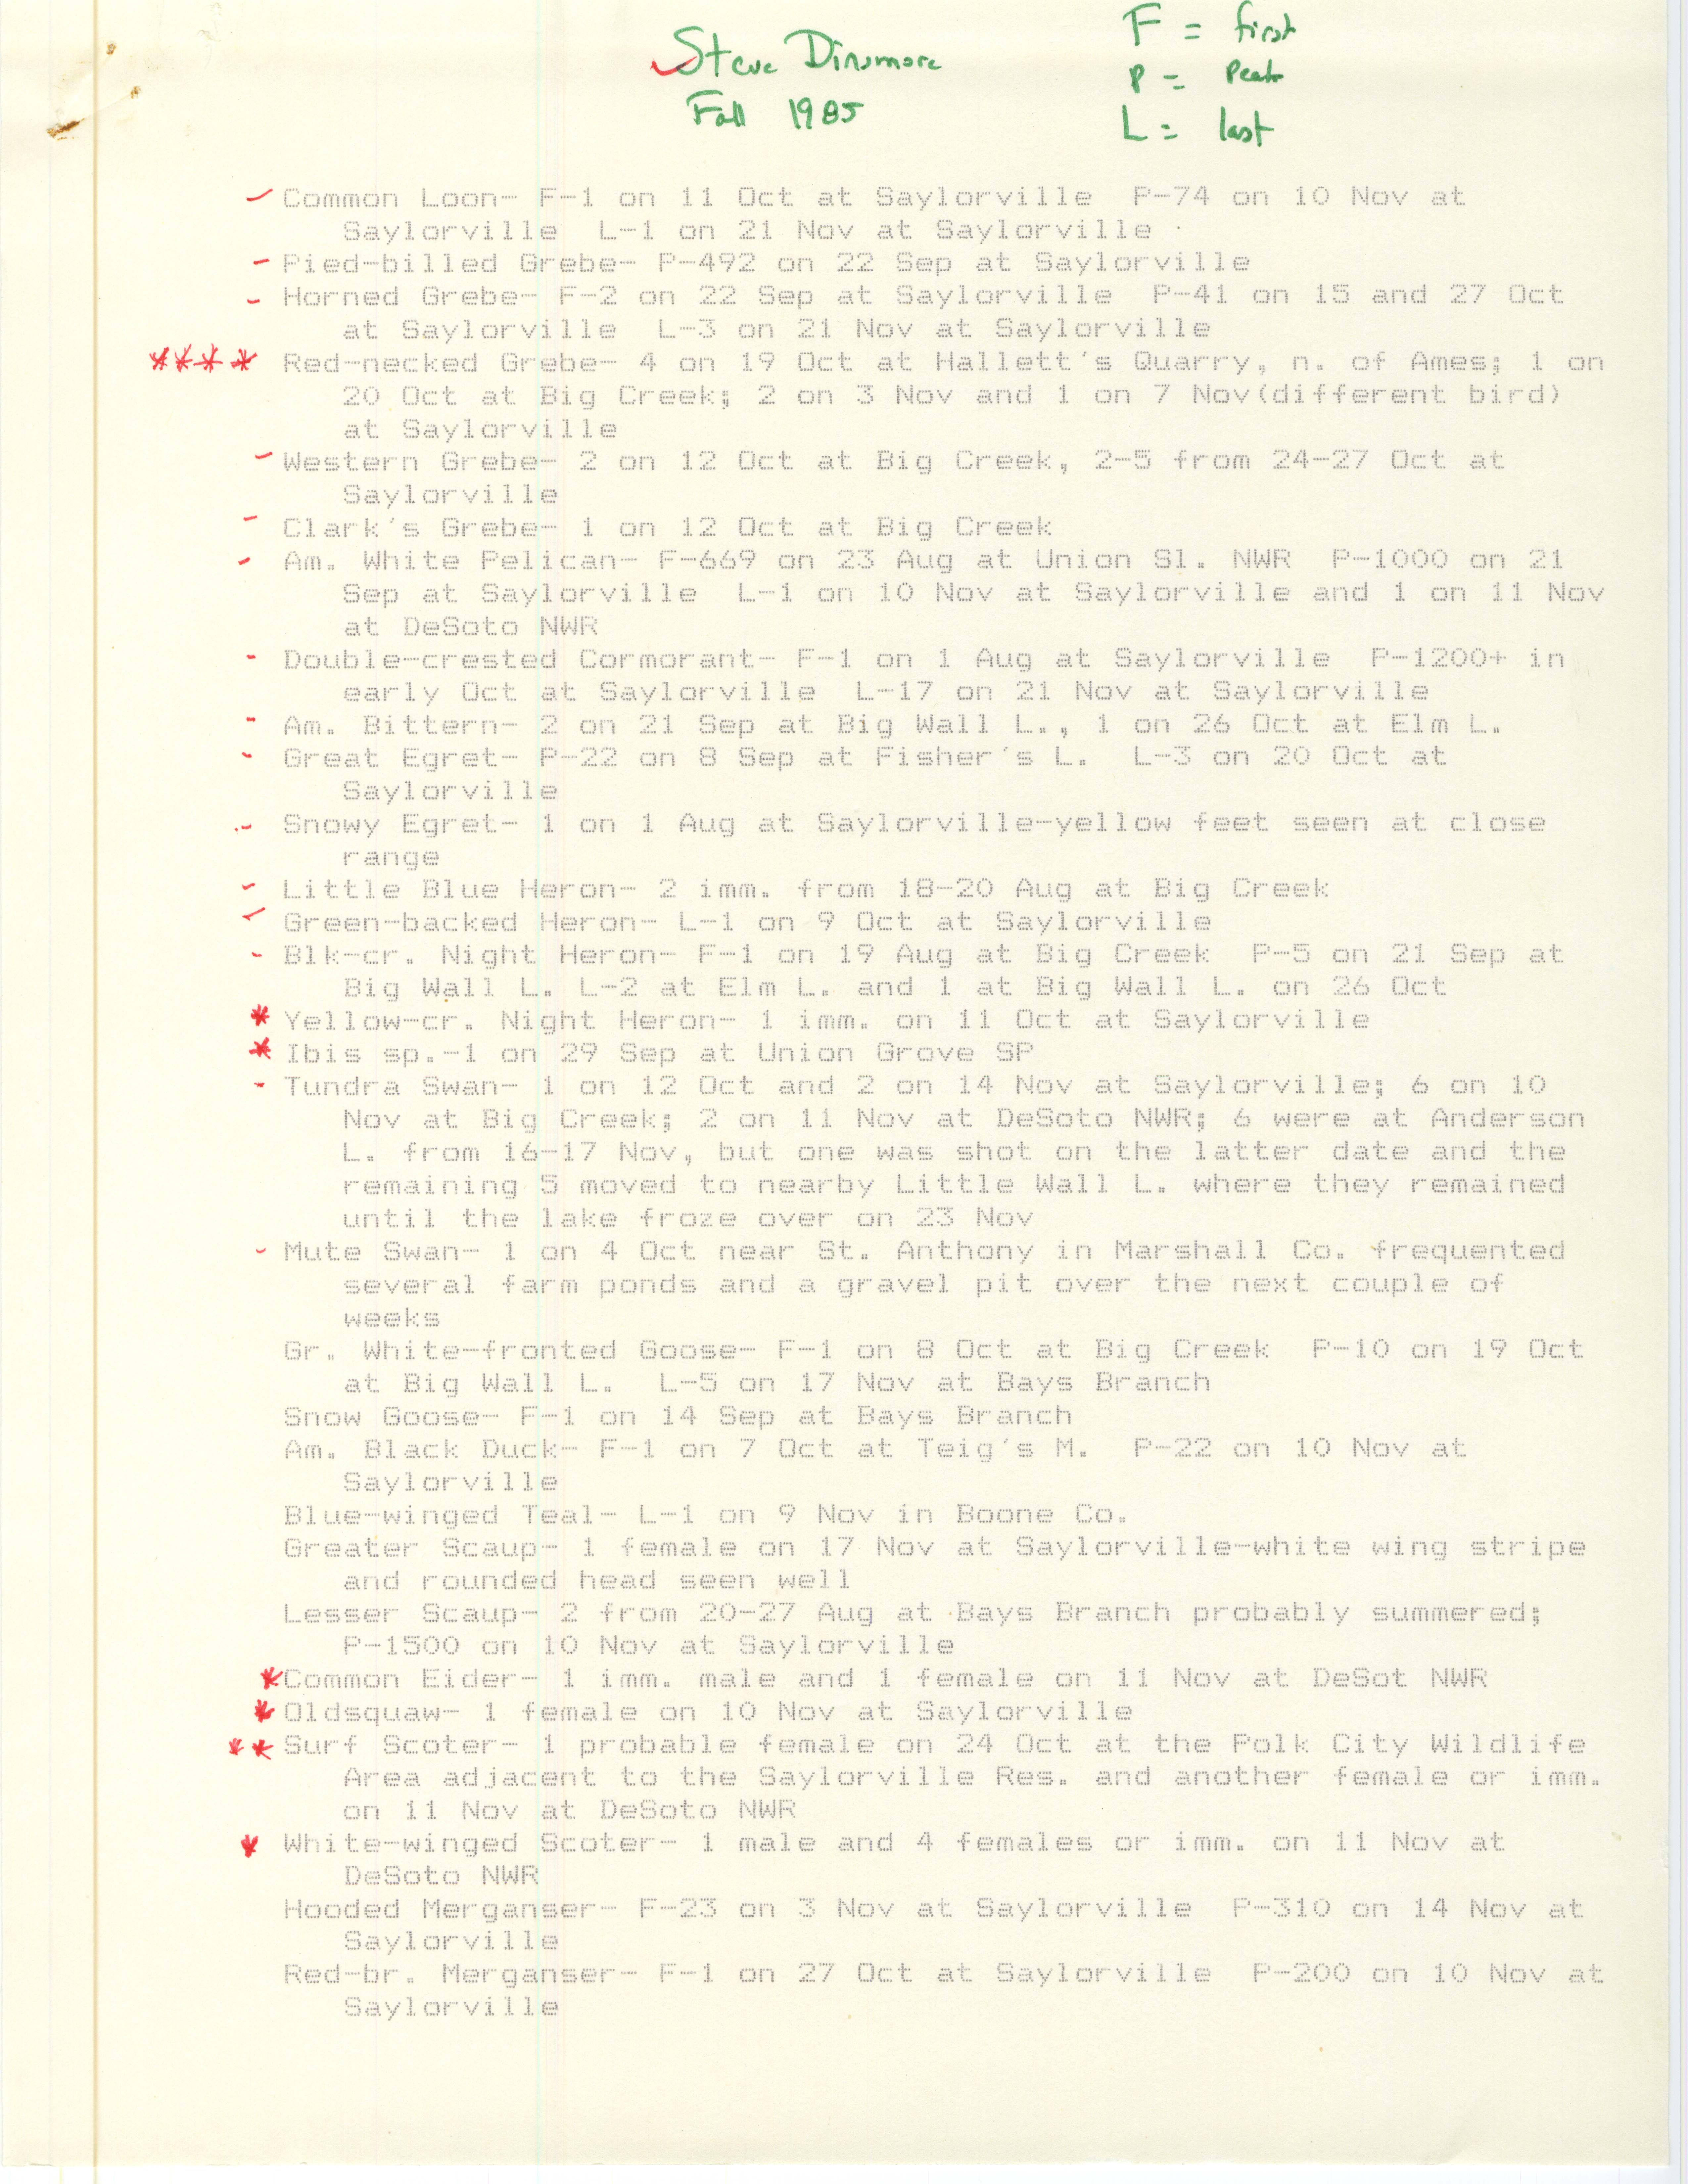 Annotated bird sighting list for Fall 1985 compiled by Steve Dinsmore